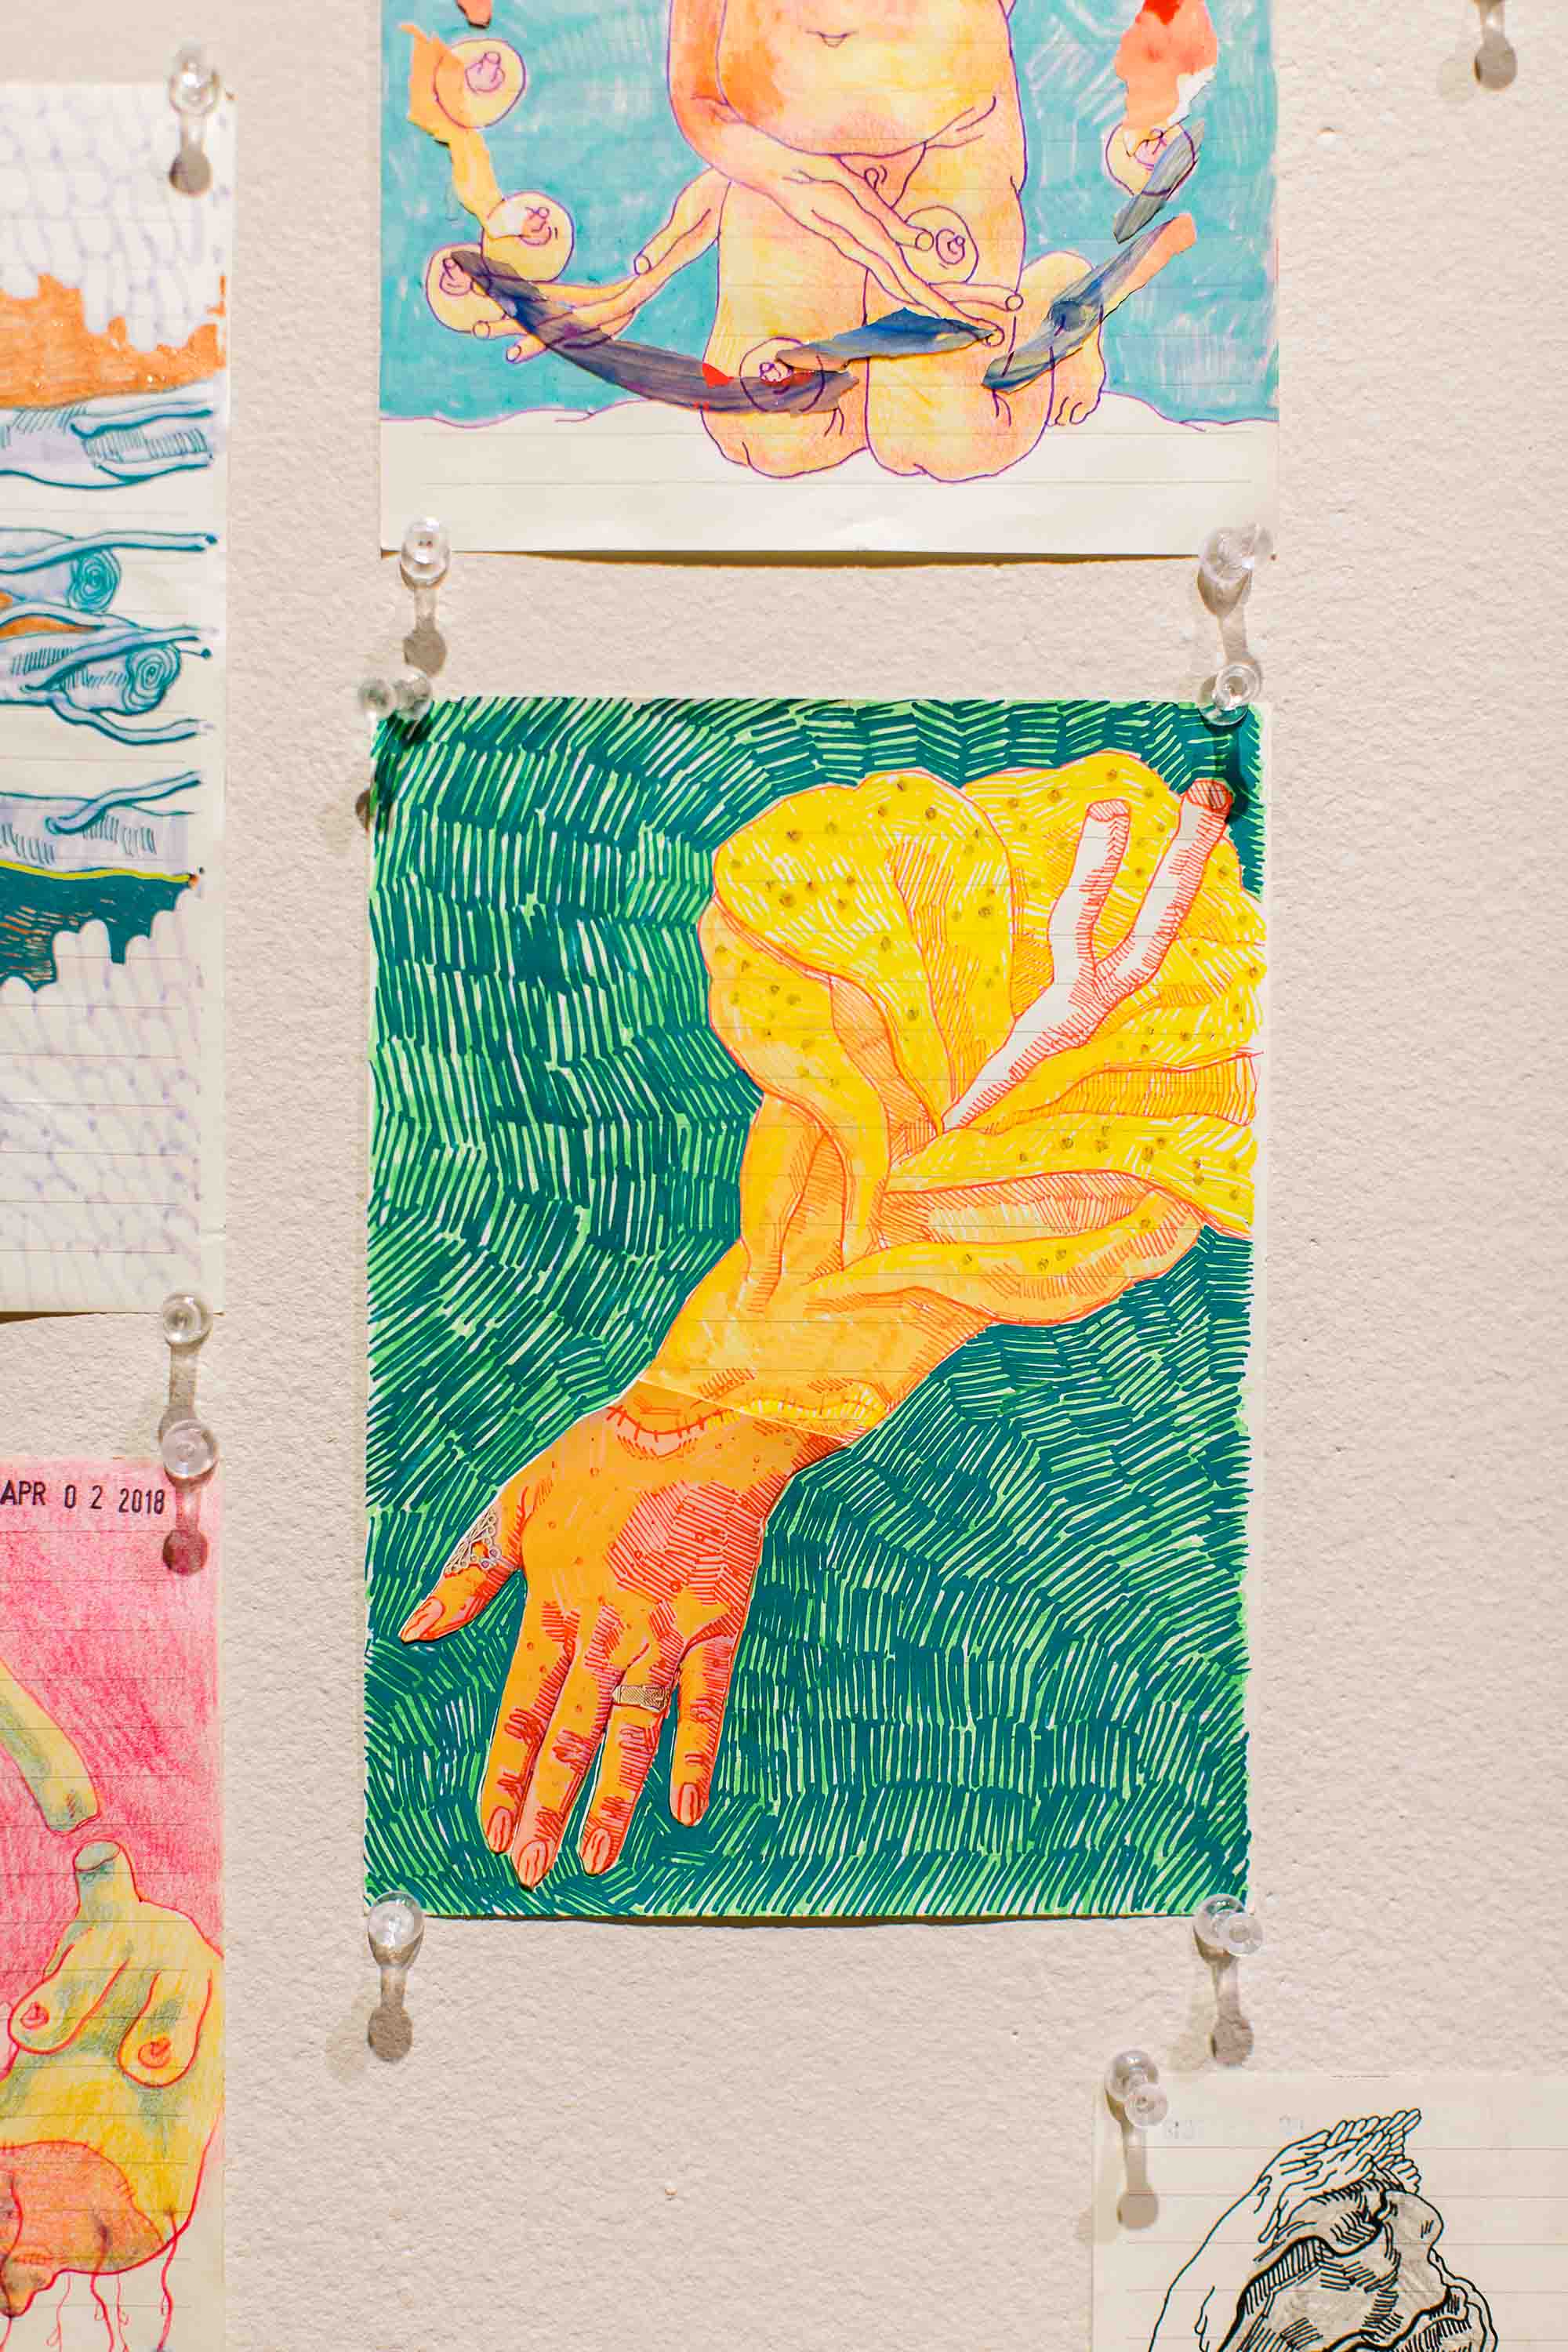 Drawing of an orange hand and wrist with peeling layers.